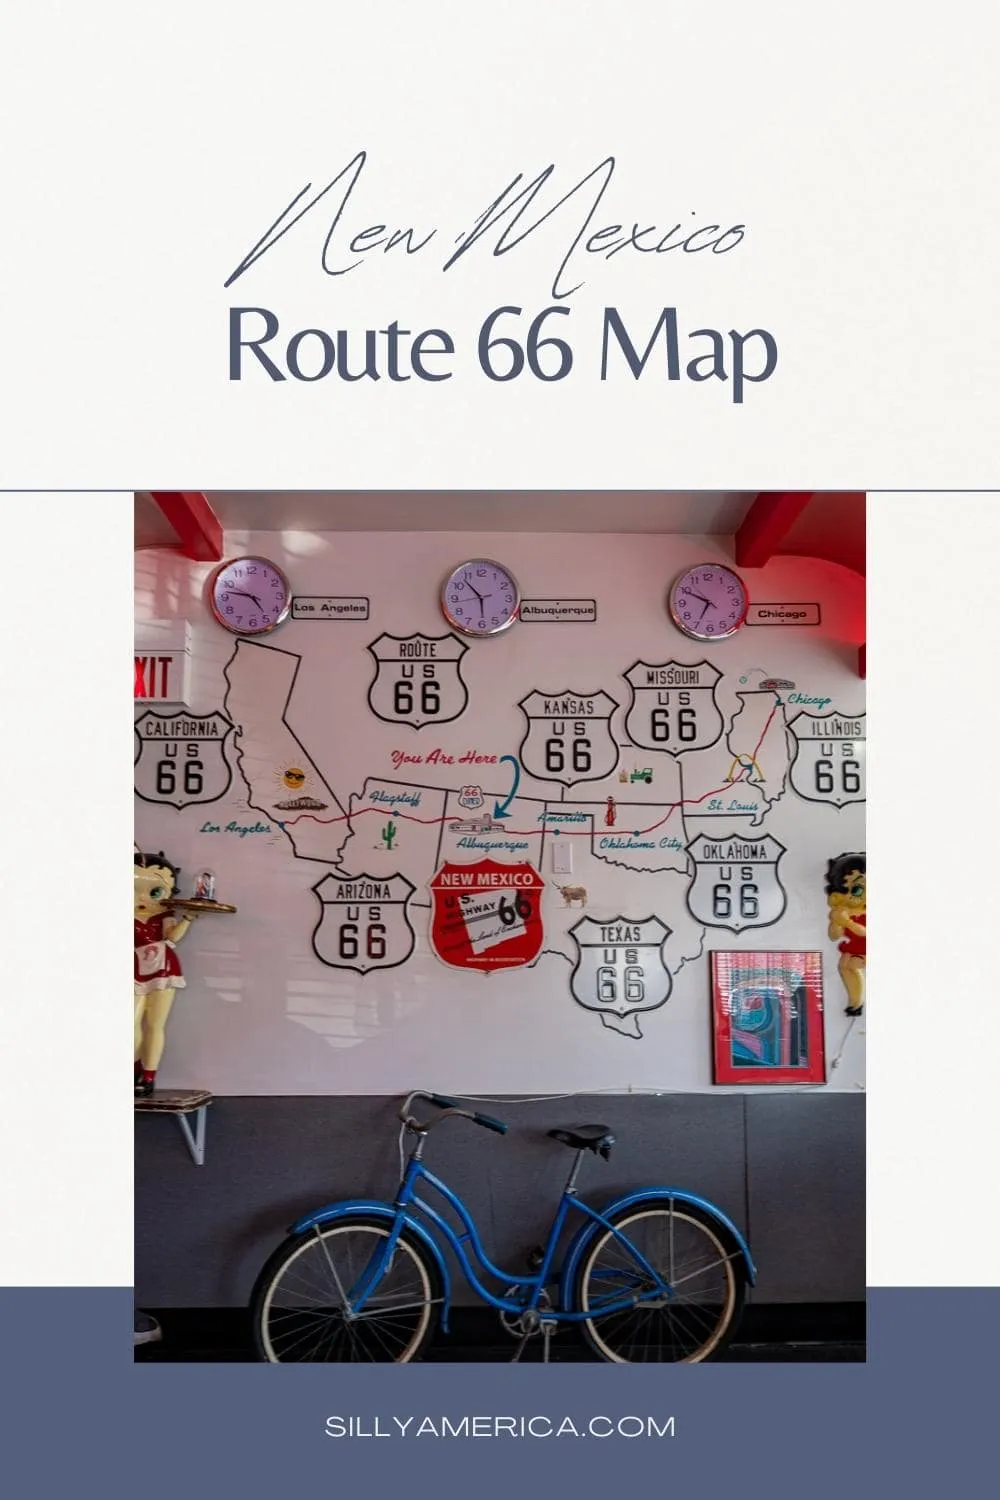 If you're planning a Route 66 road trip you need to know what to see and where to go. Our New Mexico Route 66 map contains all the best stops in the state. We've mapped out all the biggest and best roadside attractions, visitor centers, museums, restaurants, diners, fast food, vintage motels, and other iconic stops on this Route 66 New Mexico map. #Route66 #NewMexico #Route66RoadTrip #NewMexicoRoute66 #NewMexicoRoute66RoadTrip #NewMexicoRoadTrip #travel #RoadTrip